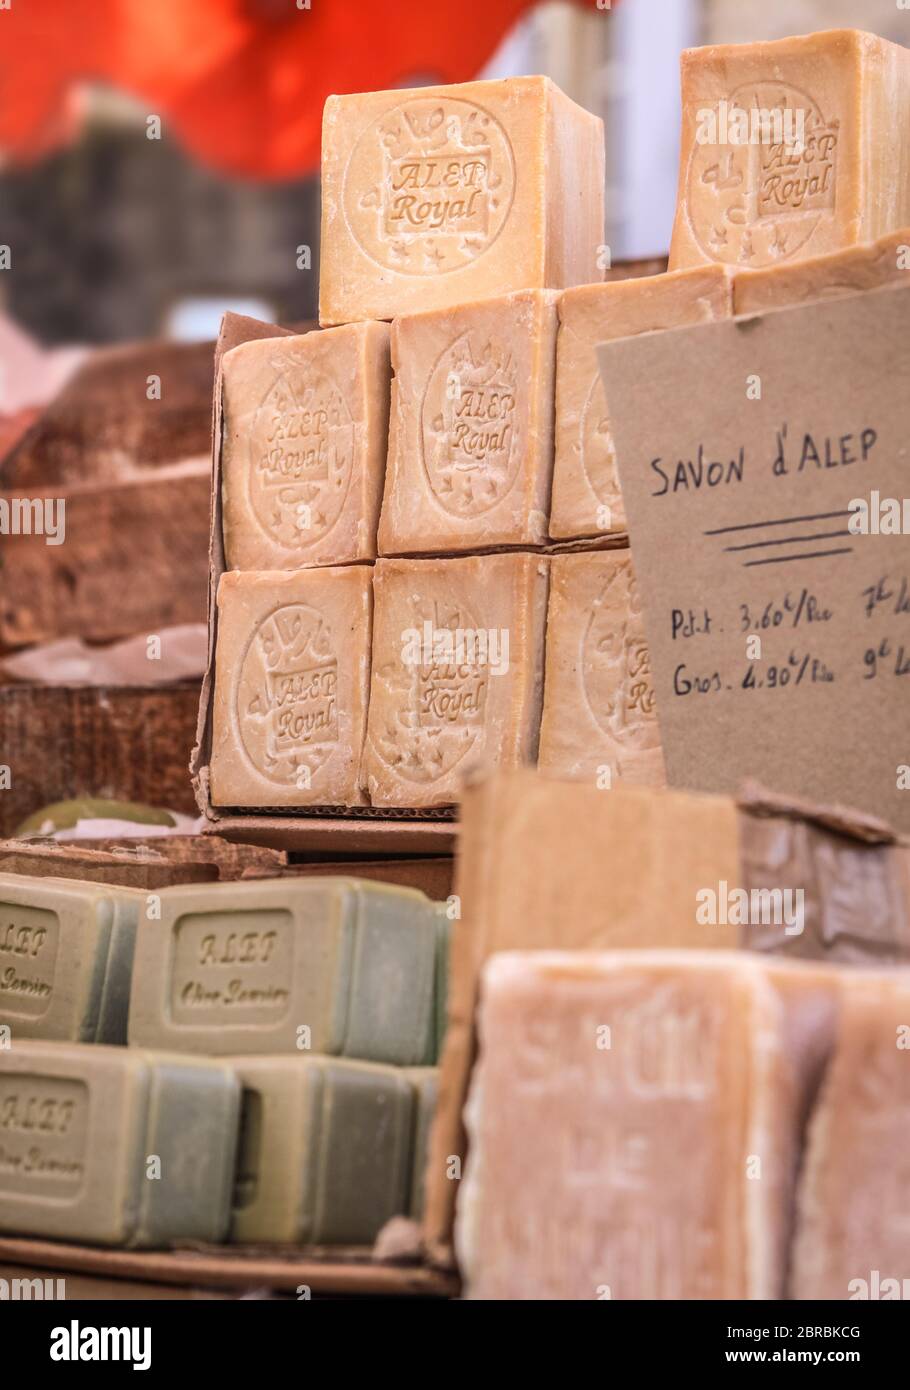 Rustic soaps in the village of Gordes, Provence, France Stock Photo